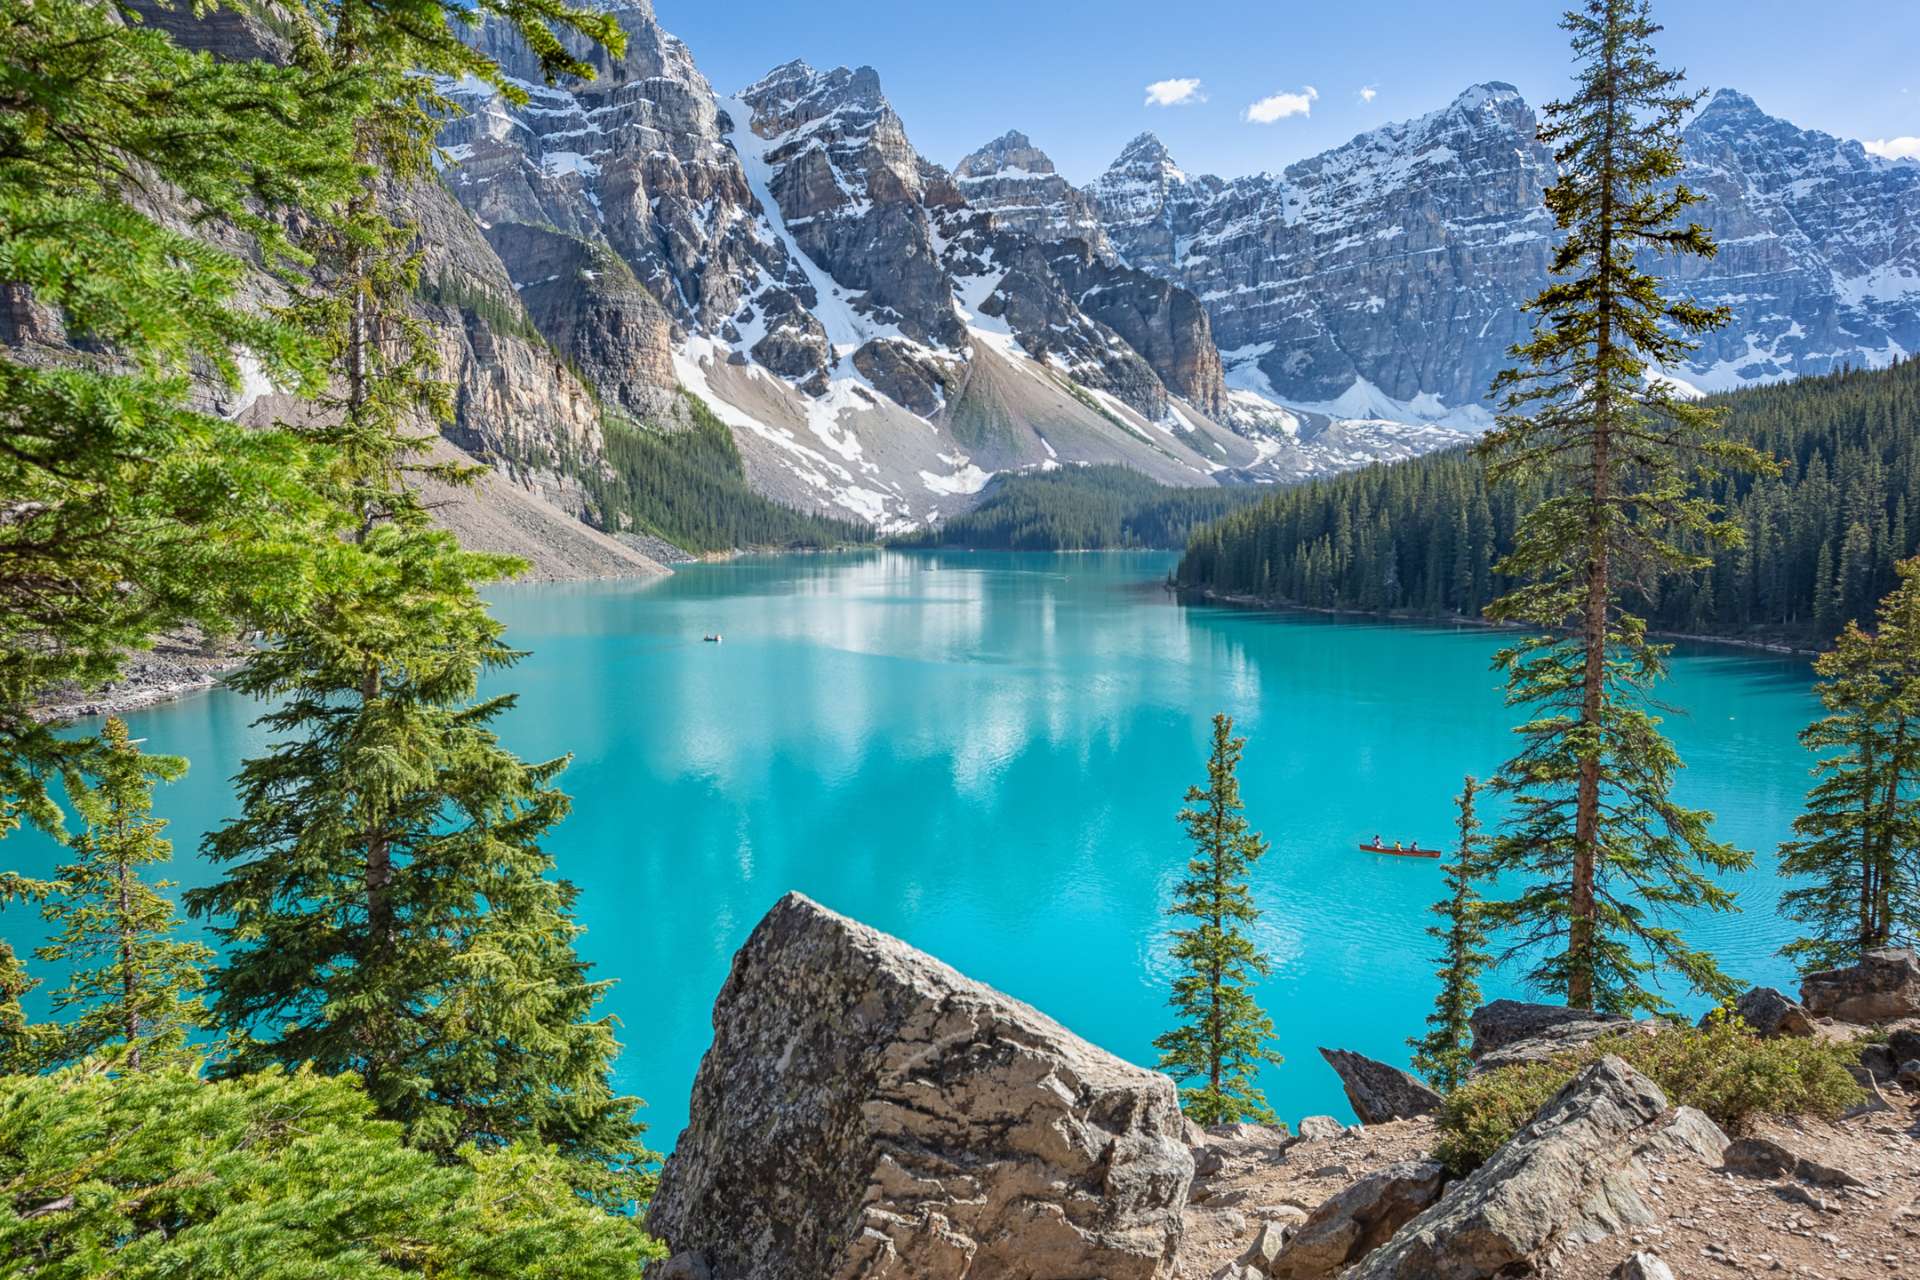 Moraine Lake in Banff National Park, Alberta, Canada ©Getty Images